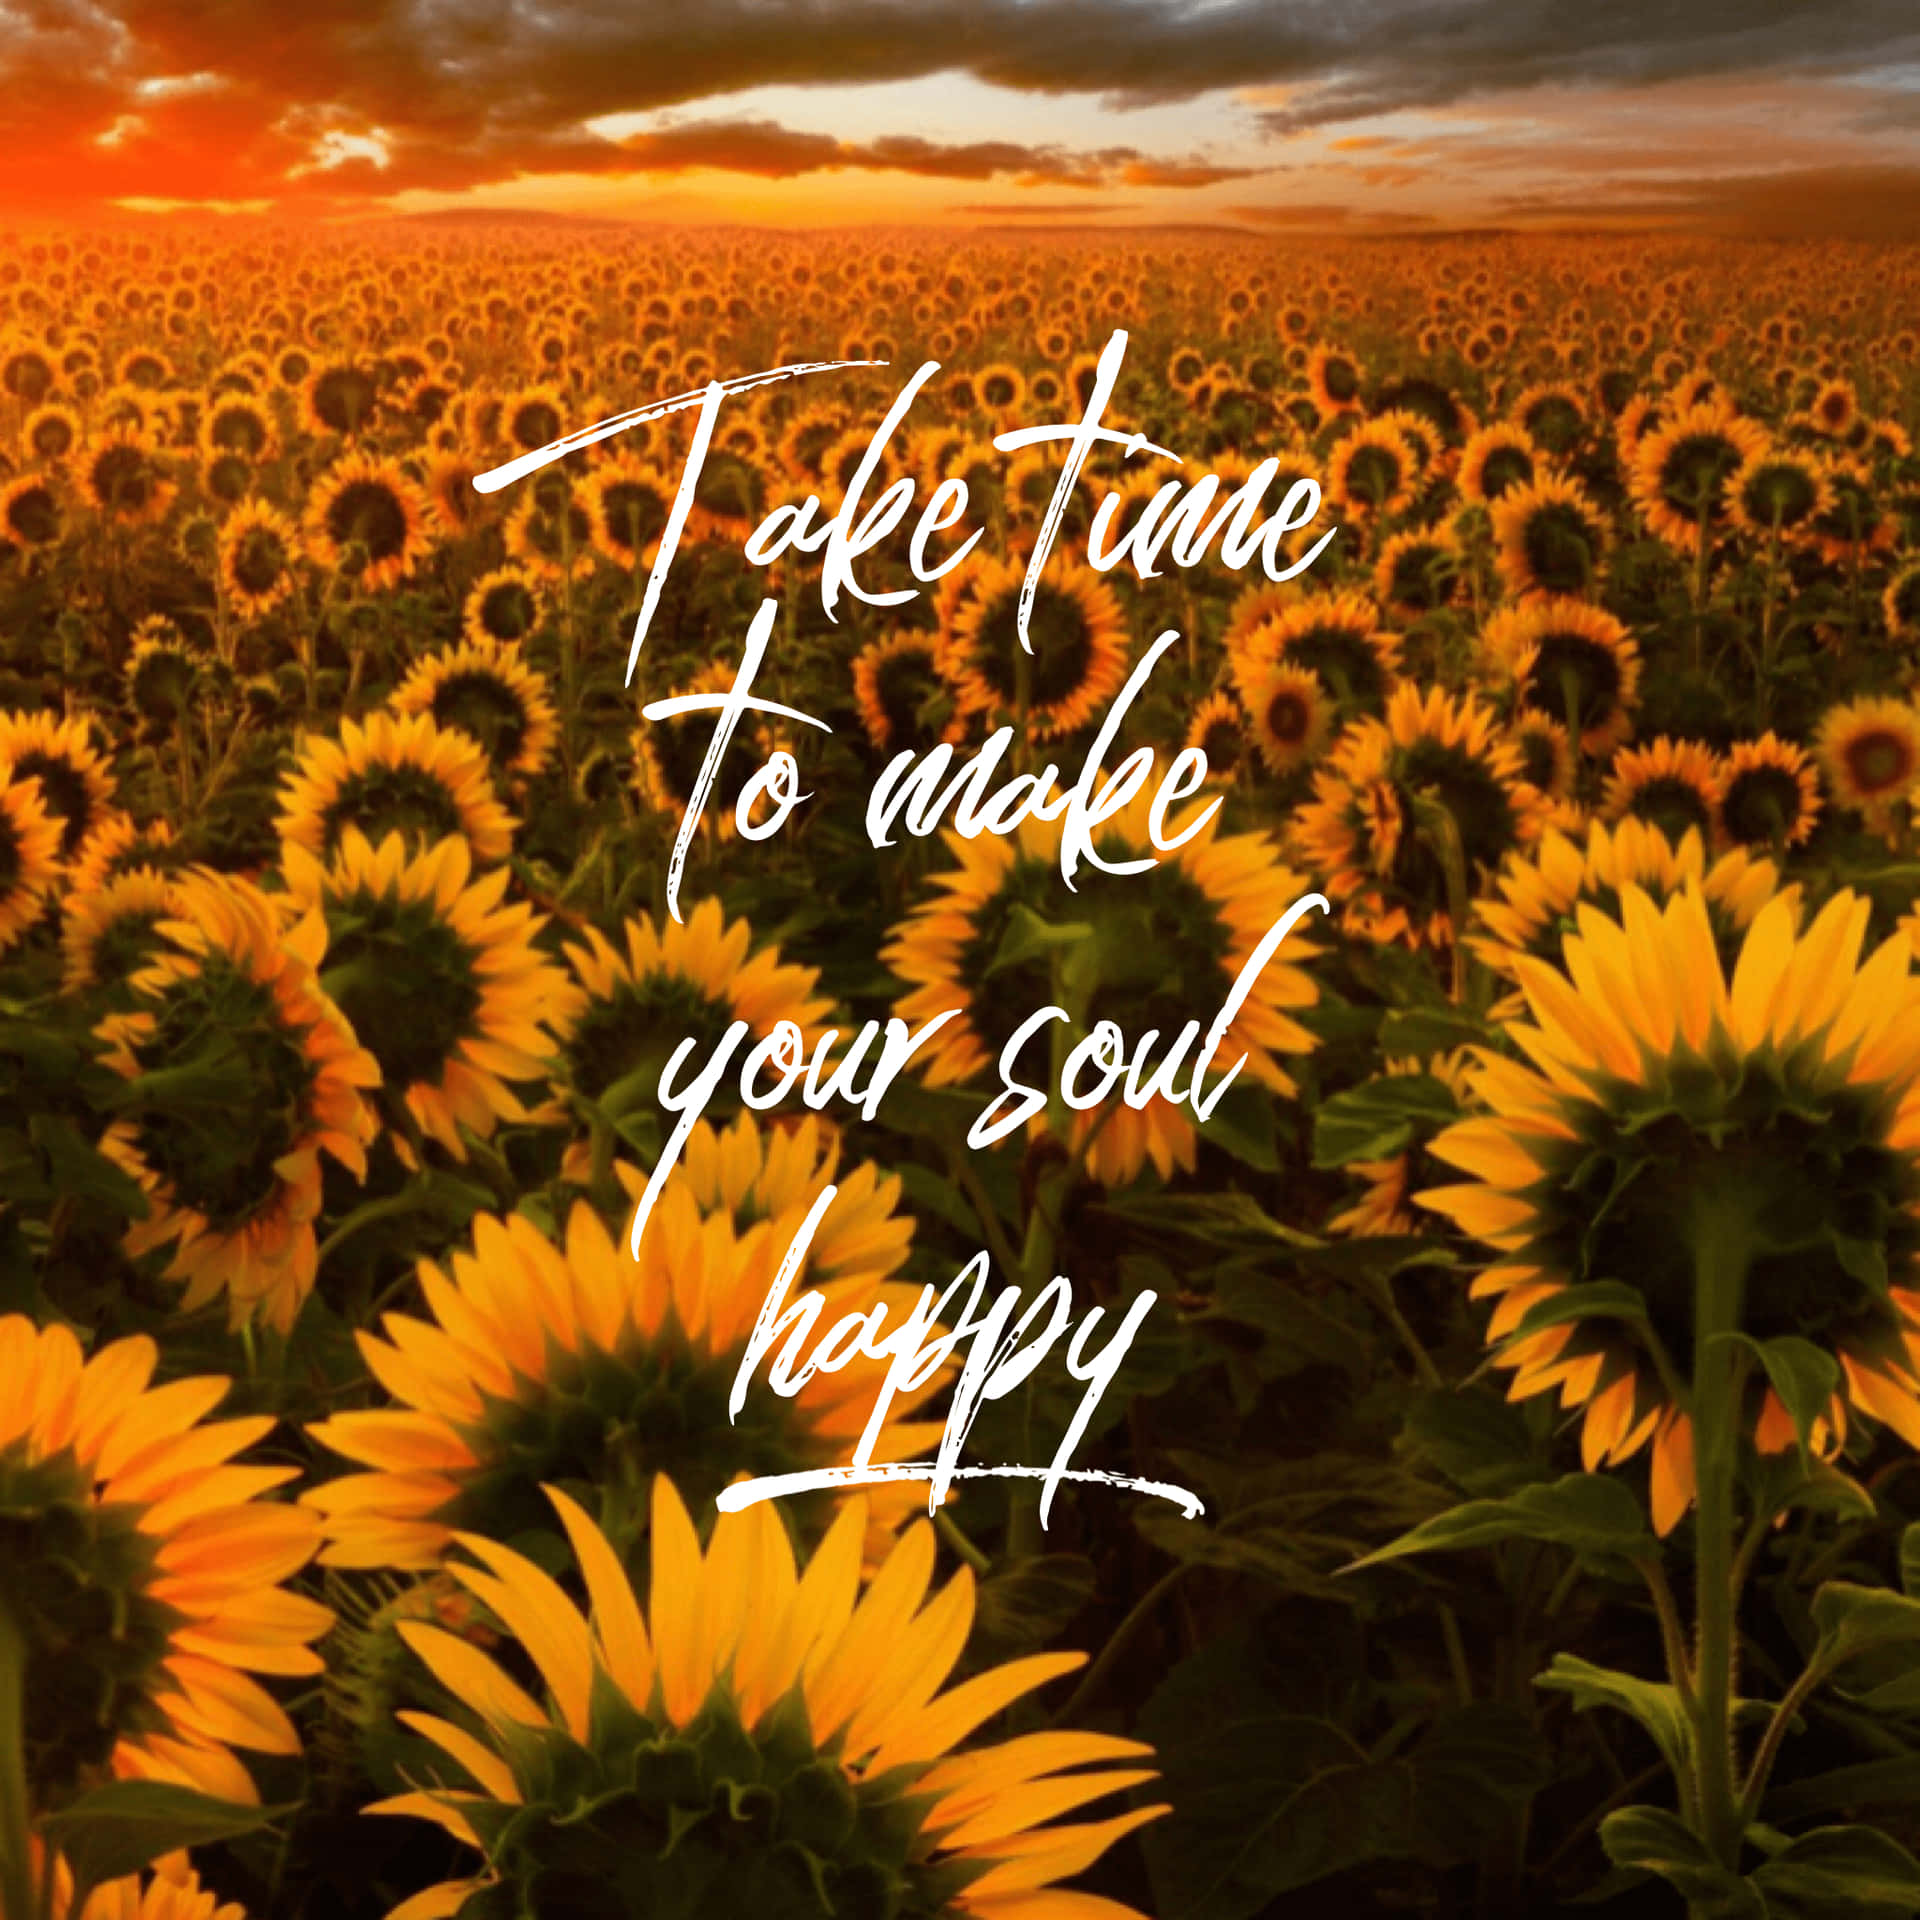 Free Sunflower Quotes Wallpaper Downloads, Sunflower Quotes Wallpaper for FREE